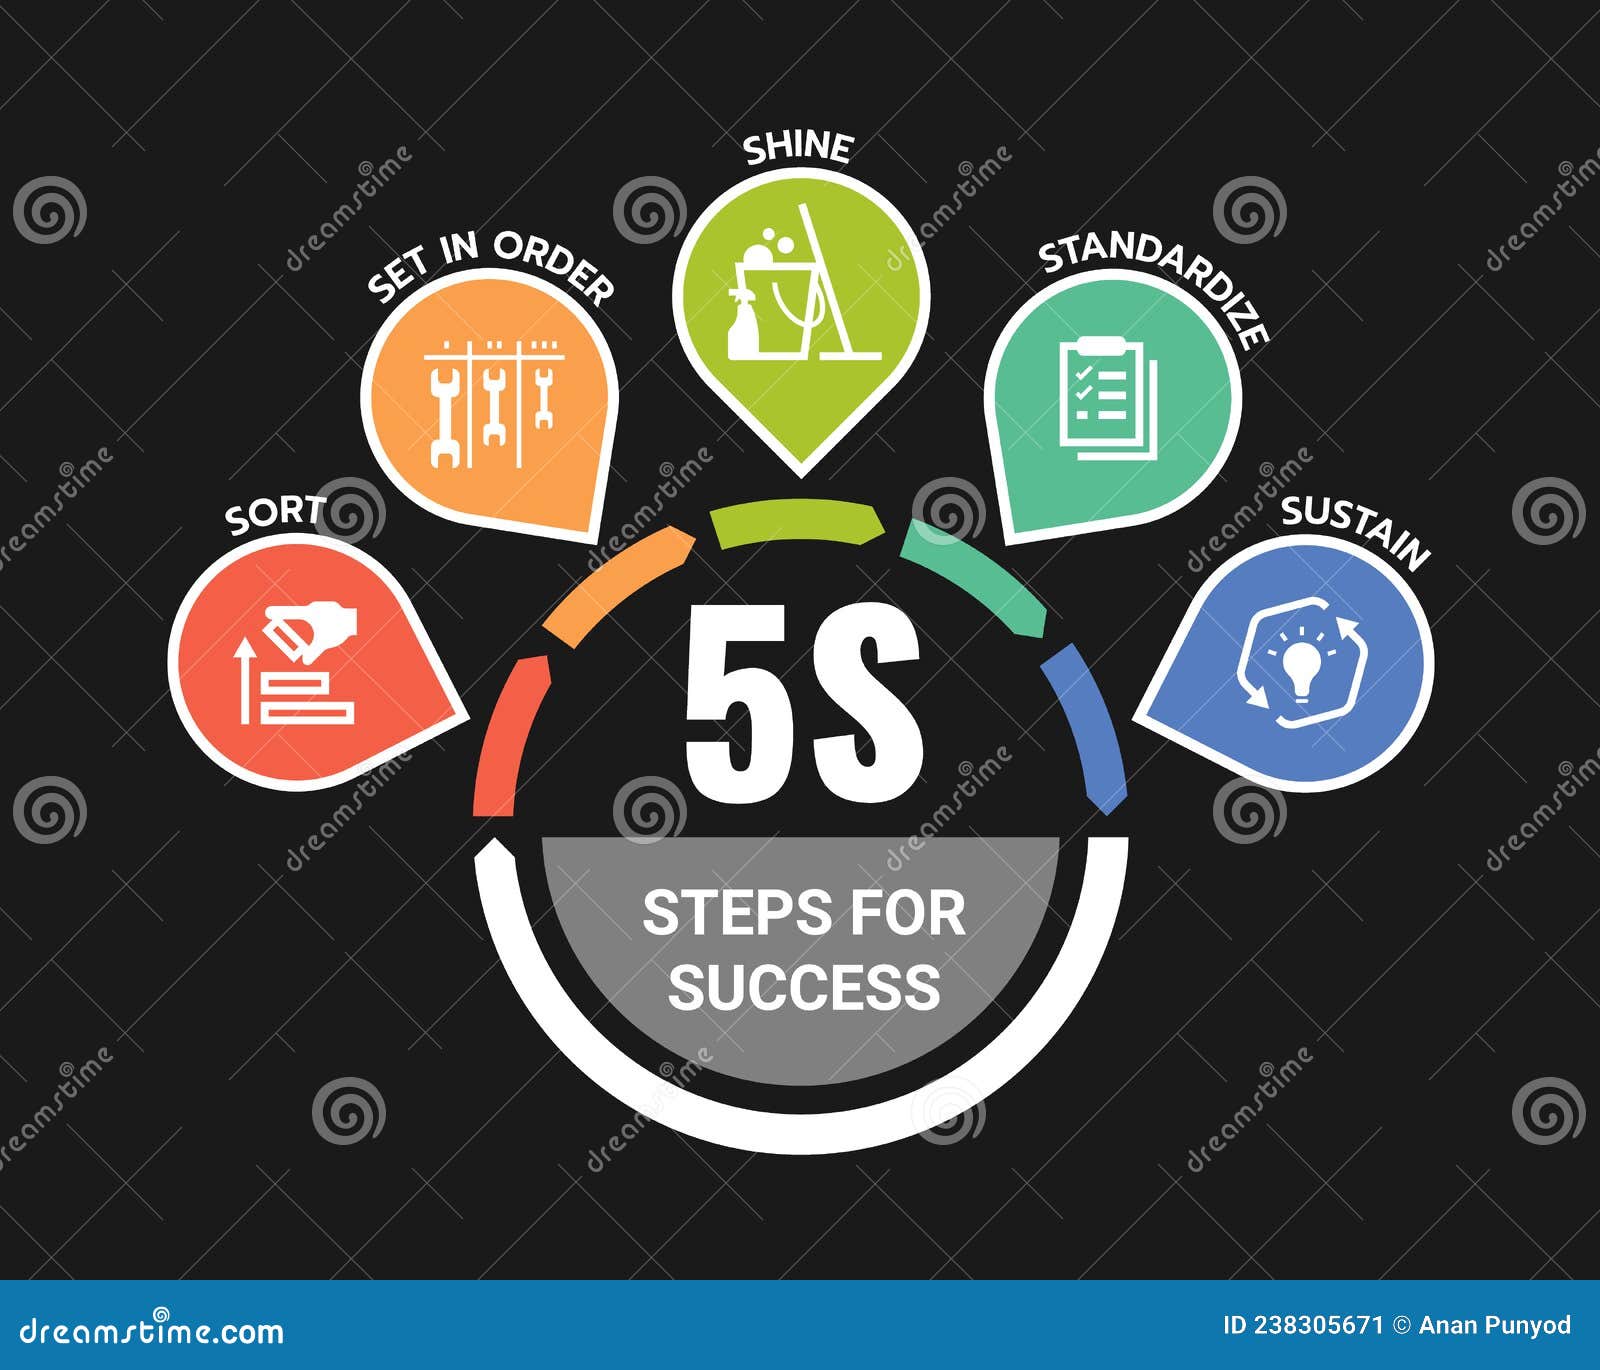 5s methodology steps for success chart with sort, set in order, shine, standardize and sustain icon in circle and arrow roll on